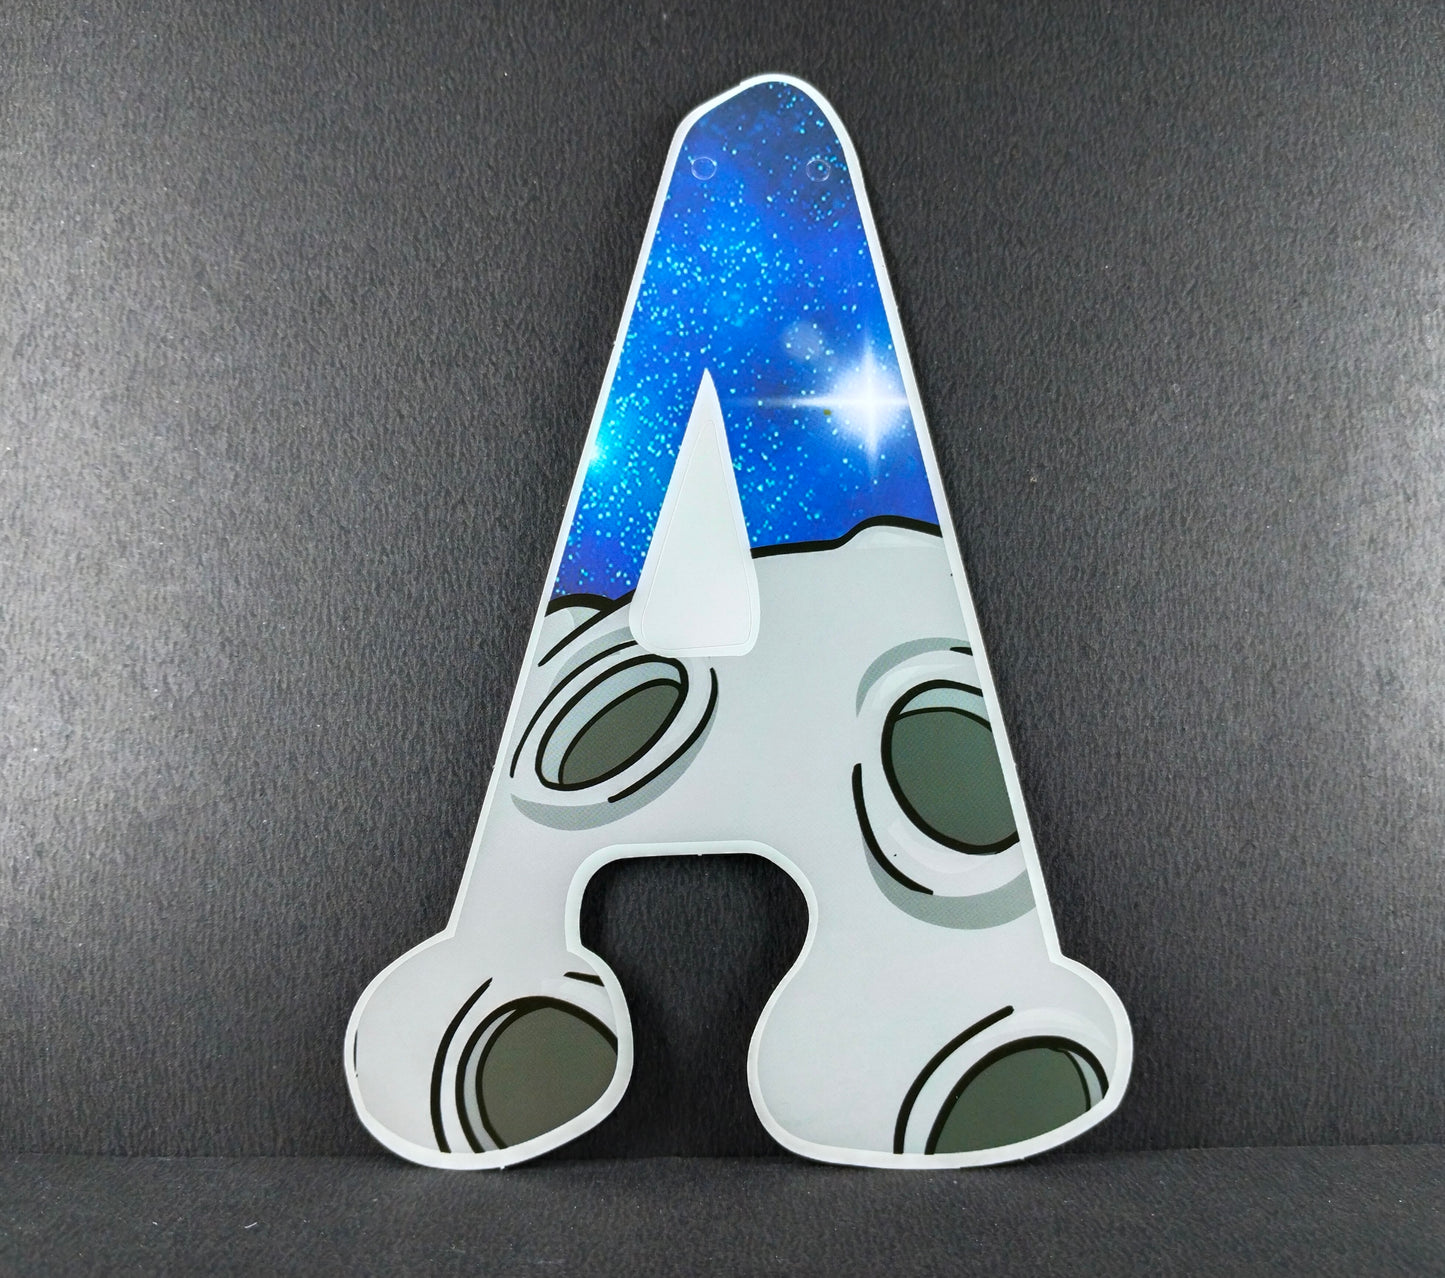 Birthday Banner - Space Theme for Simple Birthday Decorations at Home